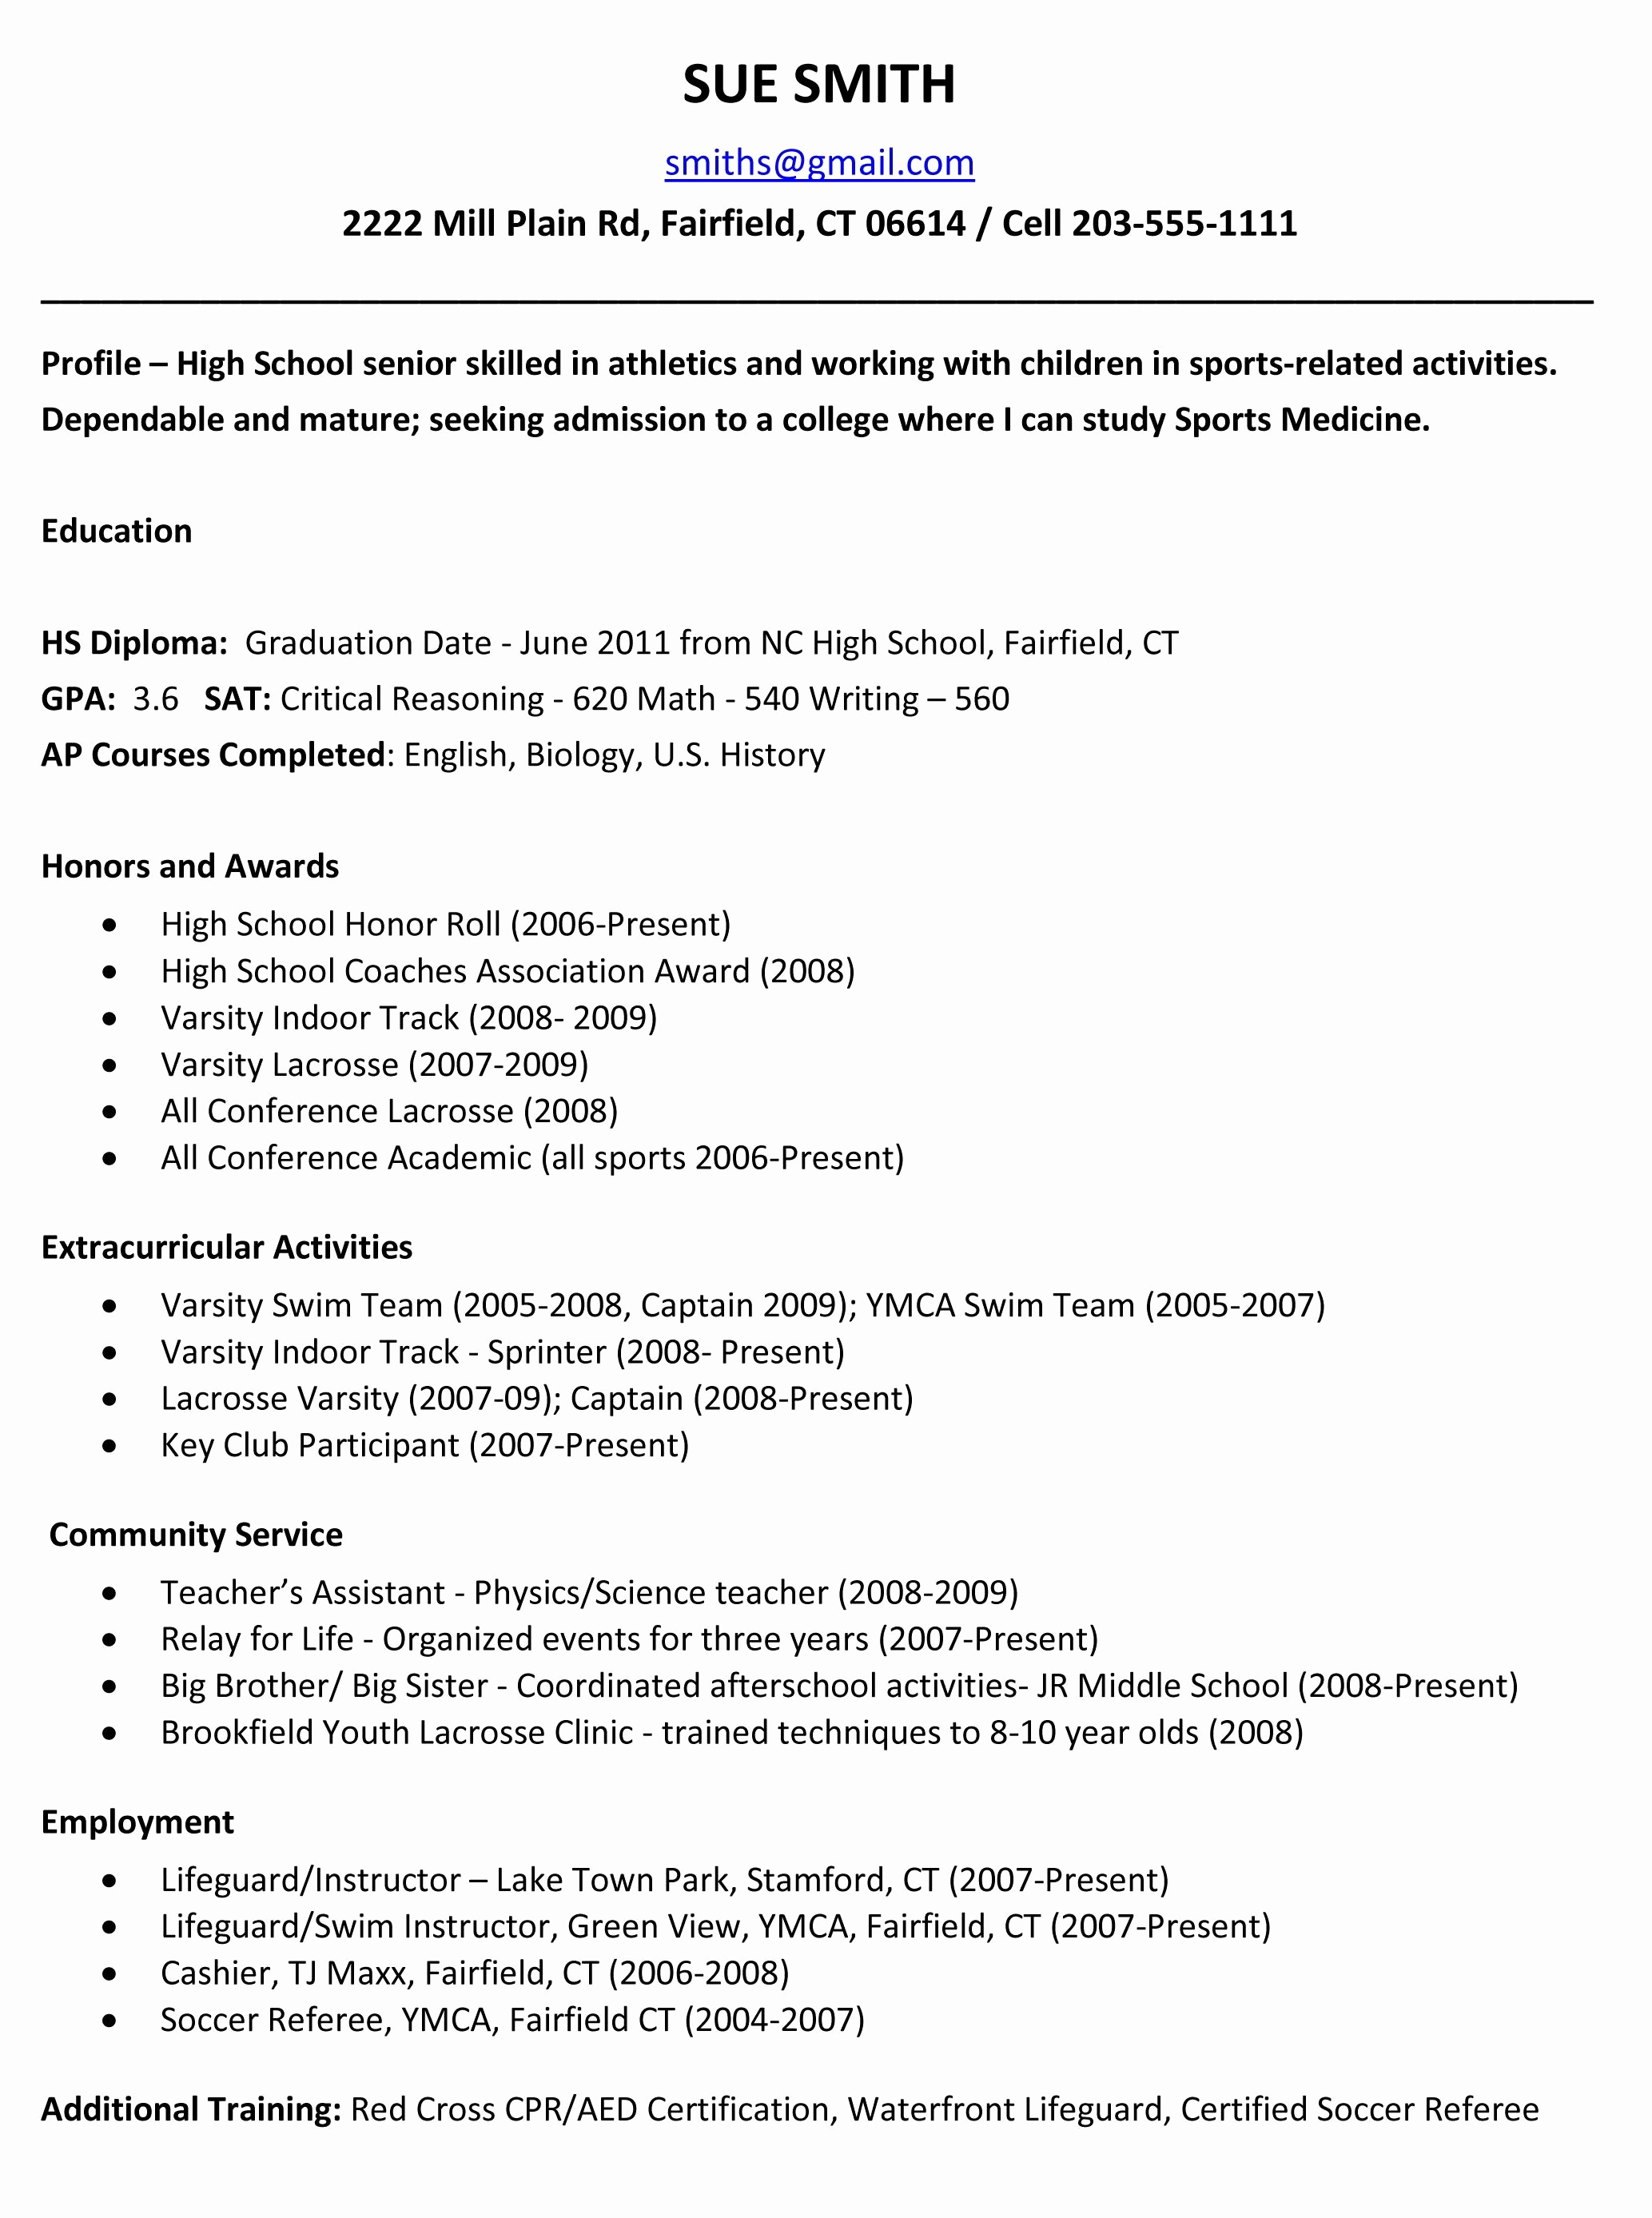 Resume Examples for Highschool Students Beautiful Example Resume for High School Students for College